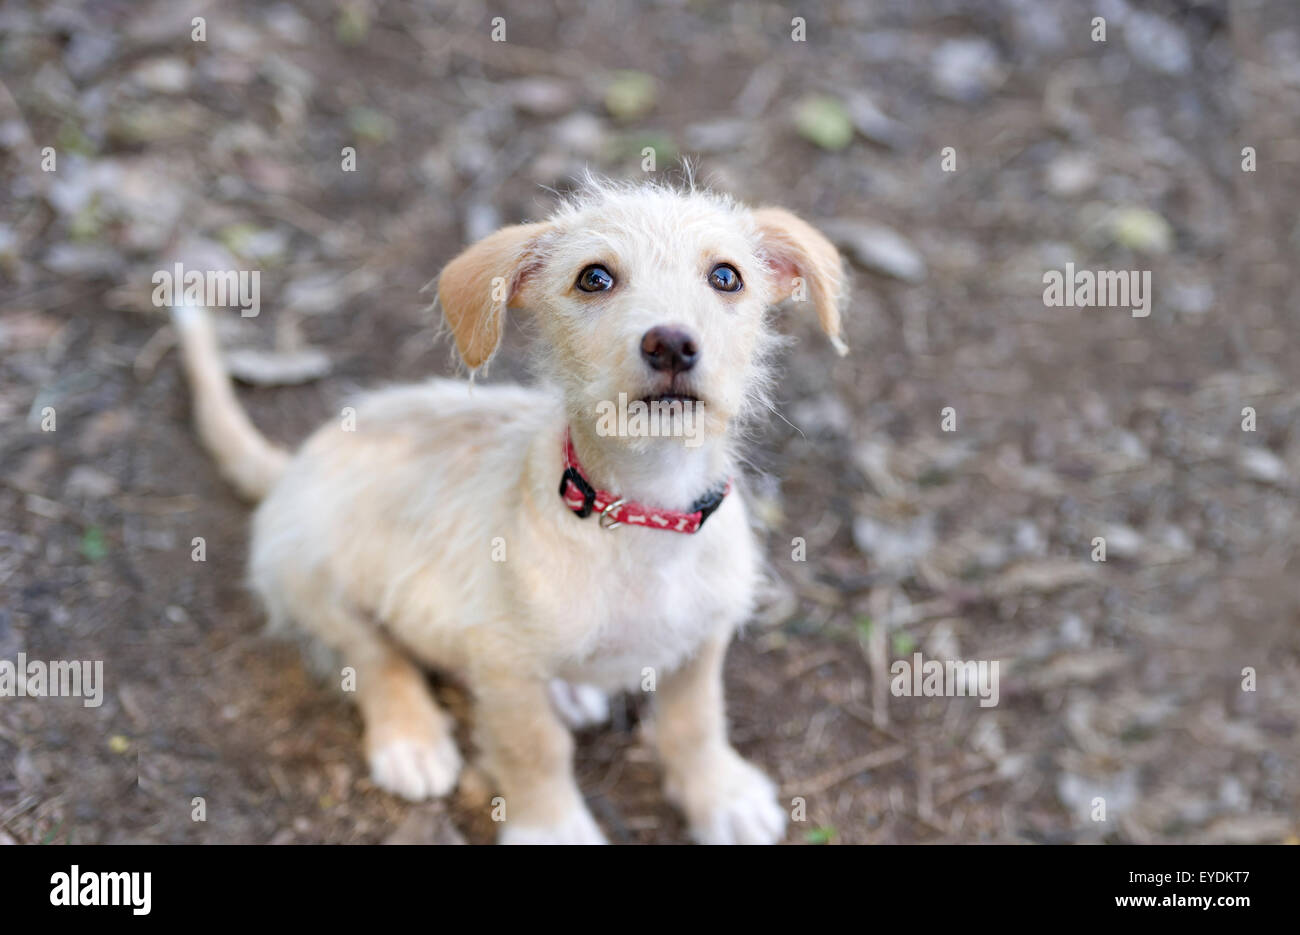 Cute dog is an adorable puppy looking up with big puppy dog eyes. Stock Photo